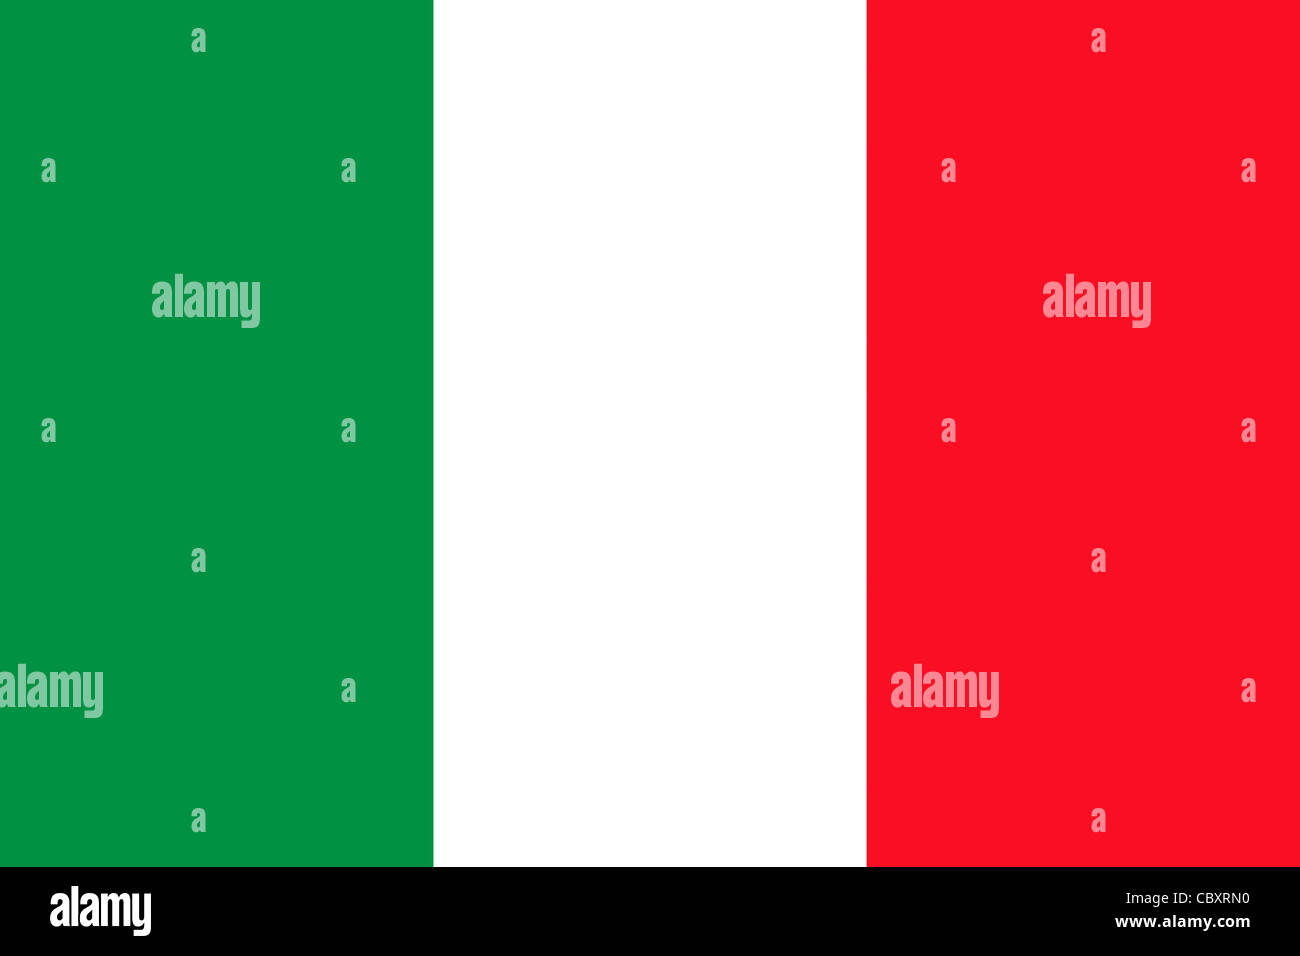 National flag of the Republic of Italy. Stock Photo